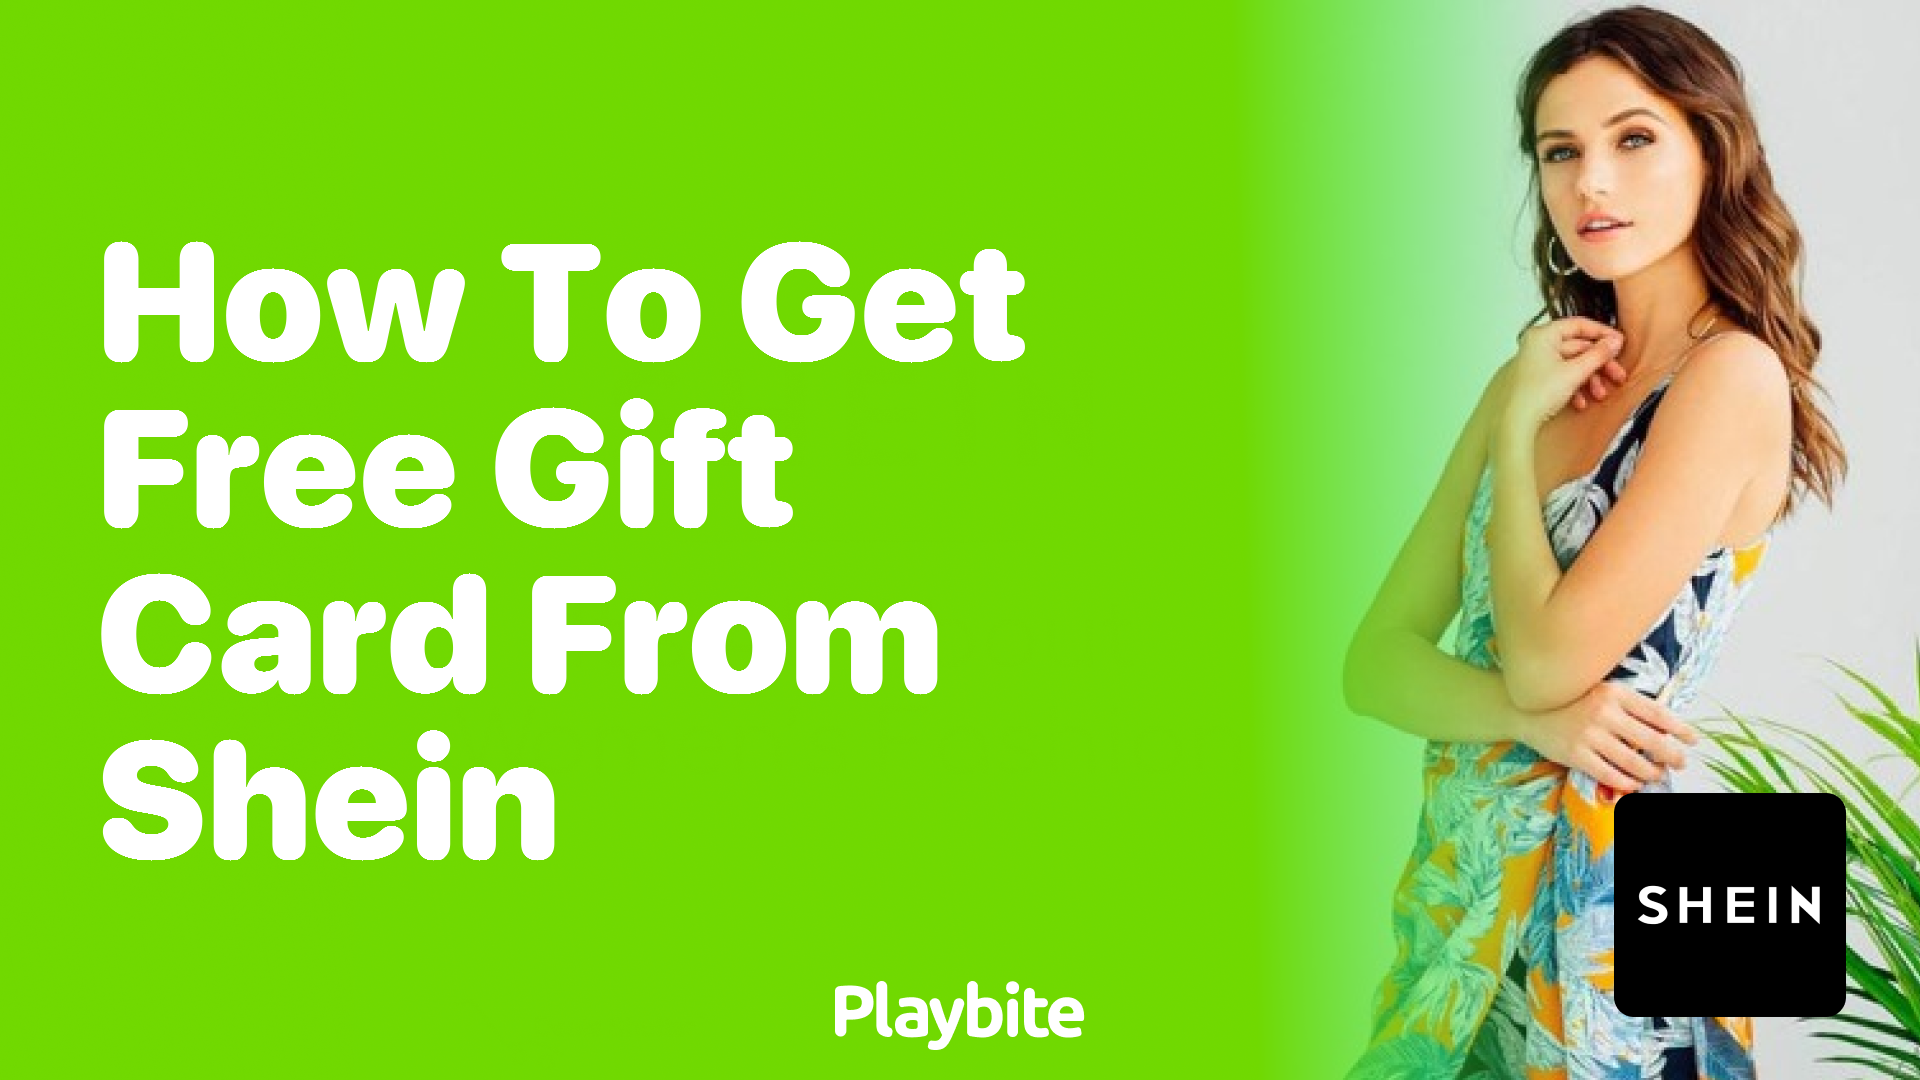 How to Get a Free Gift Card from SHEIN - Playbite